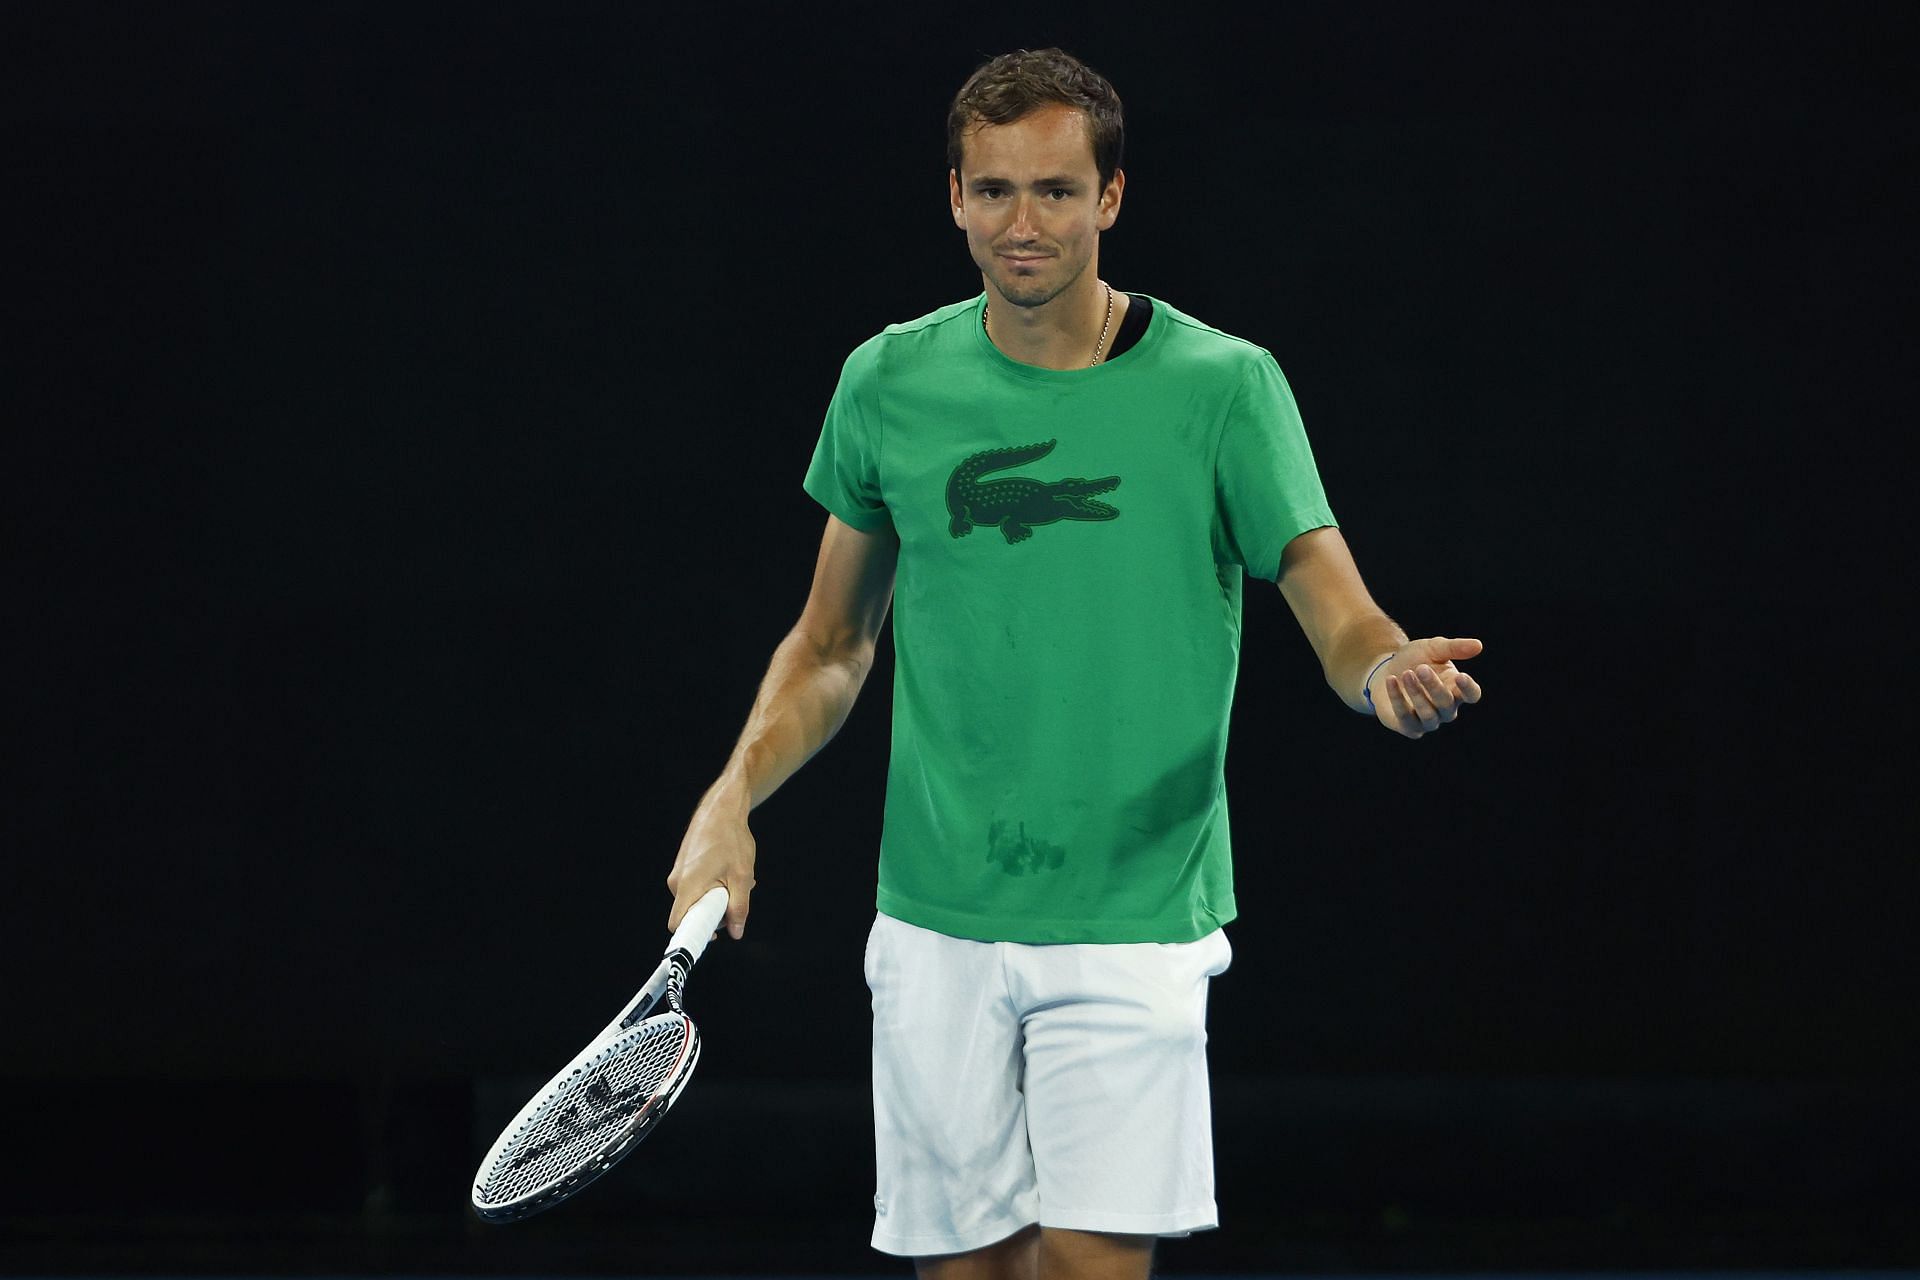 The 2021 US Open champion Daniil Medvedev practices ahead of the first Major of the season